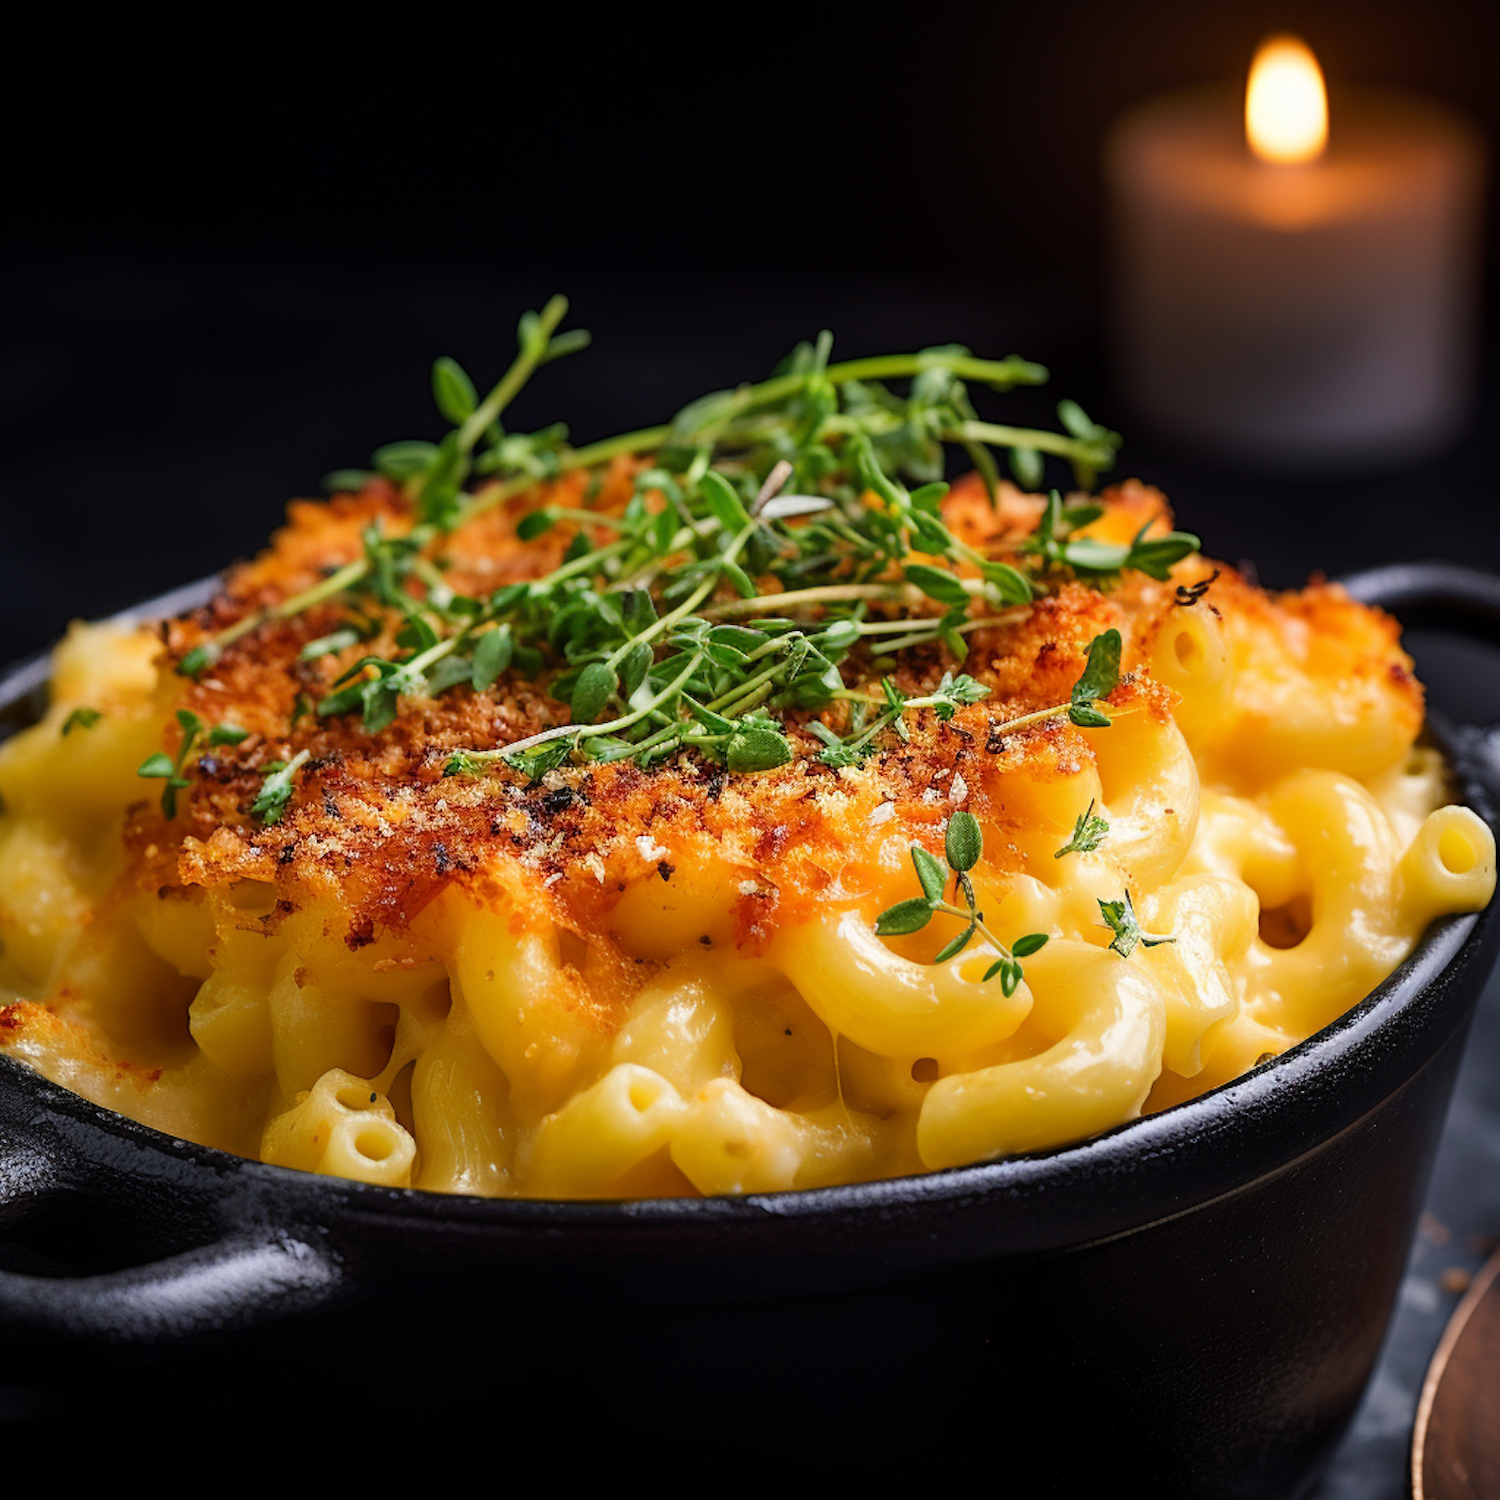 Skillet-Baked Creamy Mac and Cheese with a Crispy Herb Topping